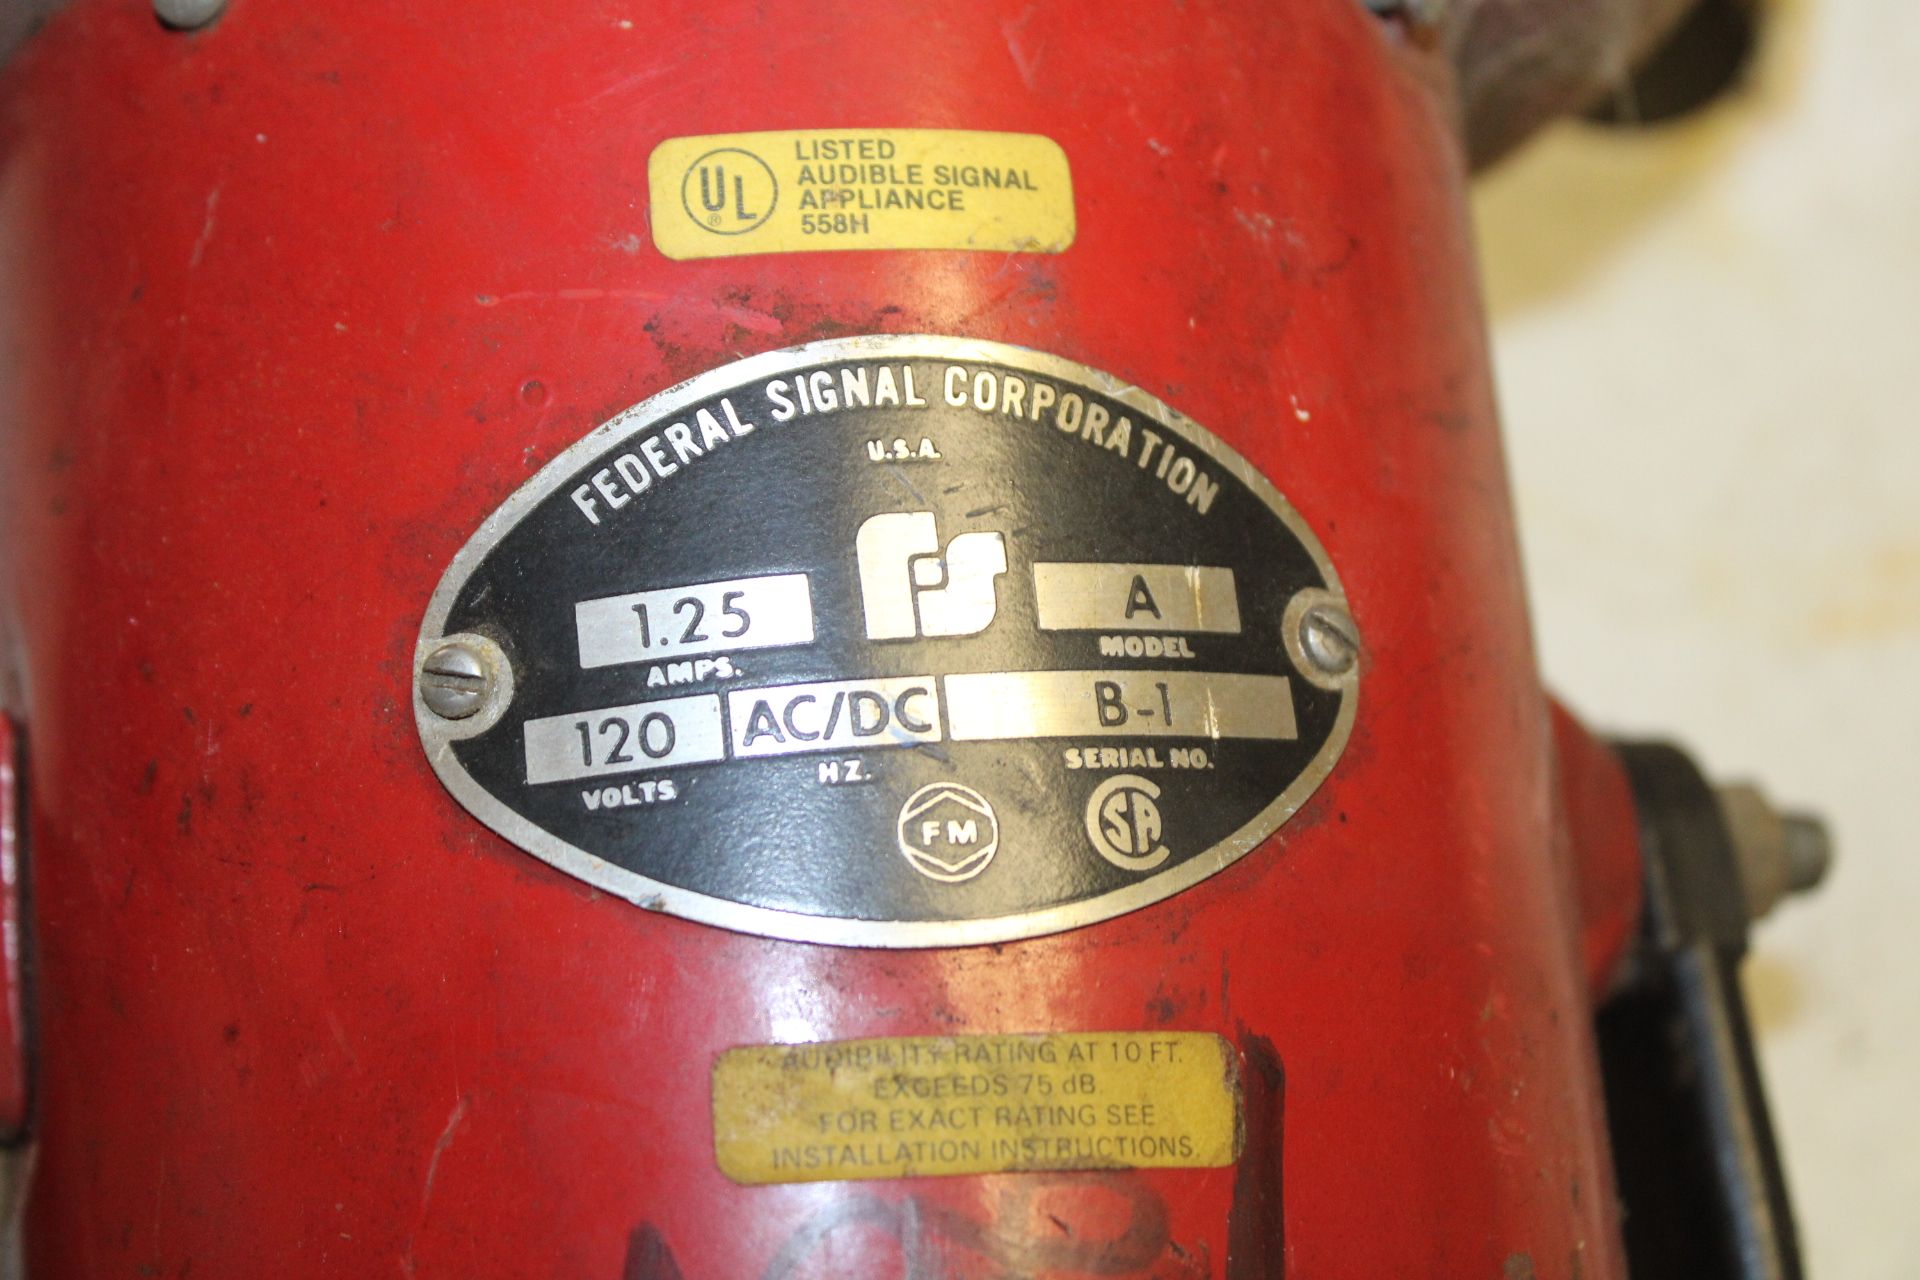 FEDERAL SIGNAL CORP., MODEL A SIREN, 120 VOLT - Image 2 of 3